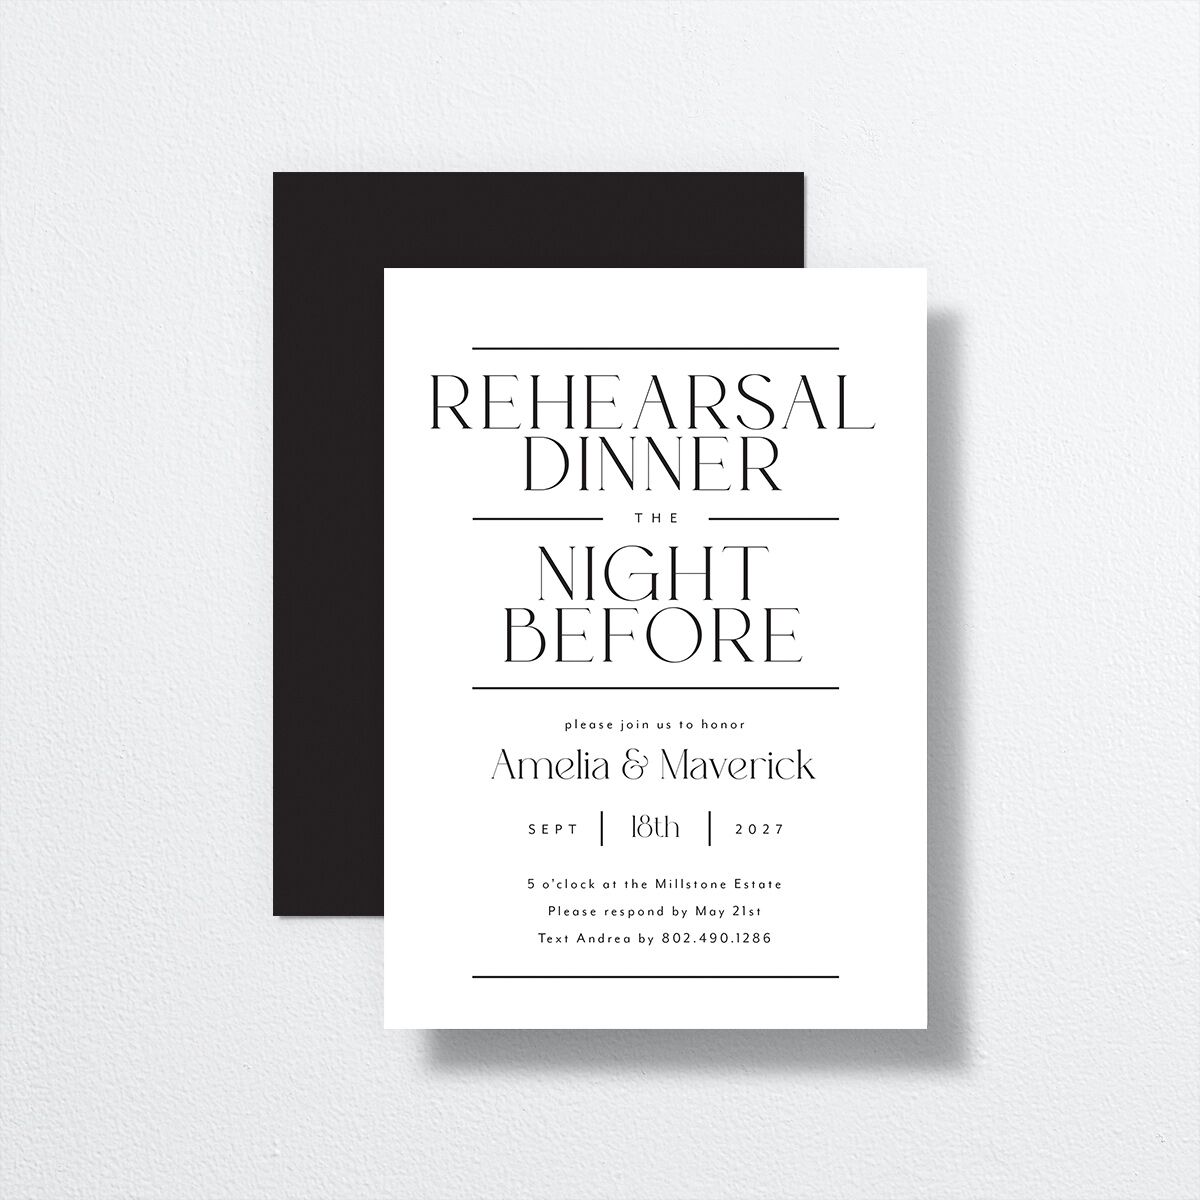 Estate Rehearsal Dinner Invitations front-and-back in white